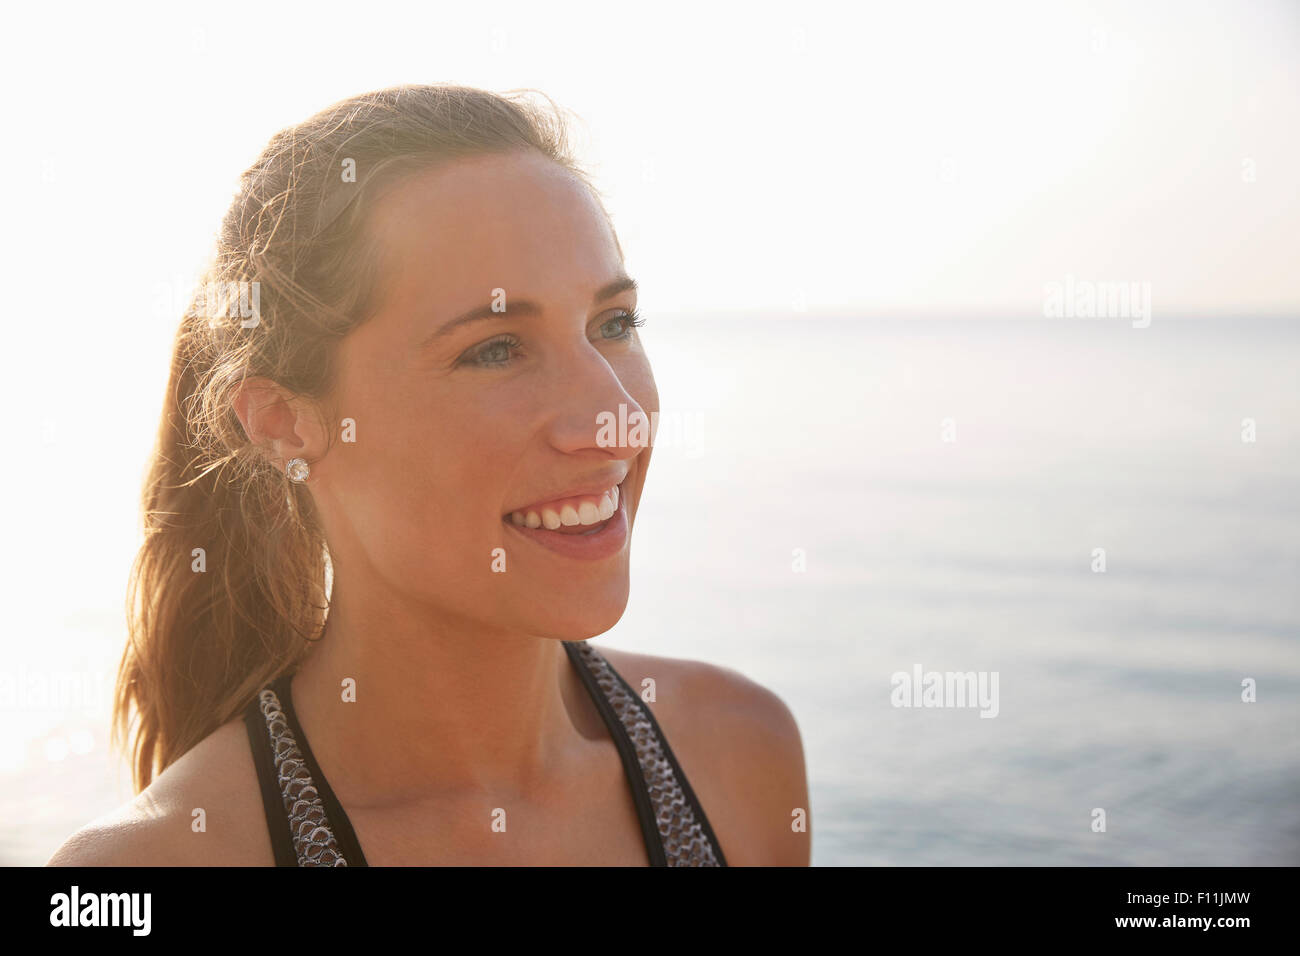 Close up of smiling woman on beach Stock Photo